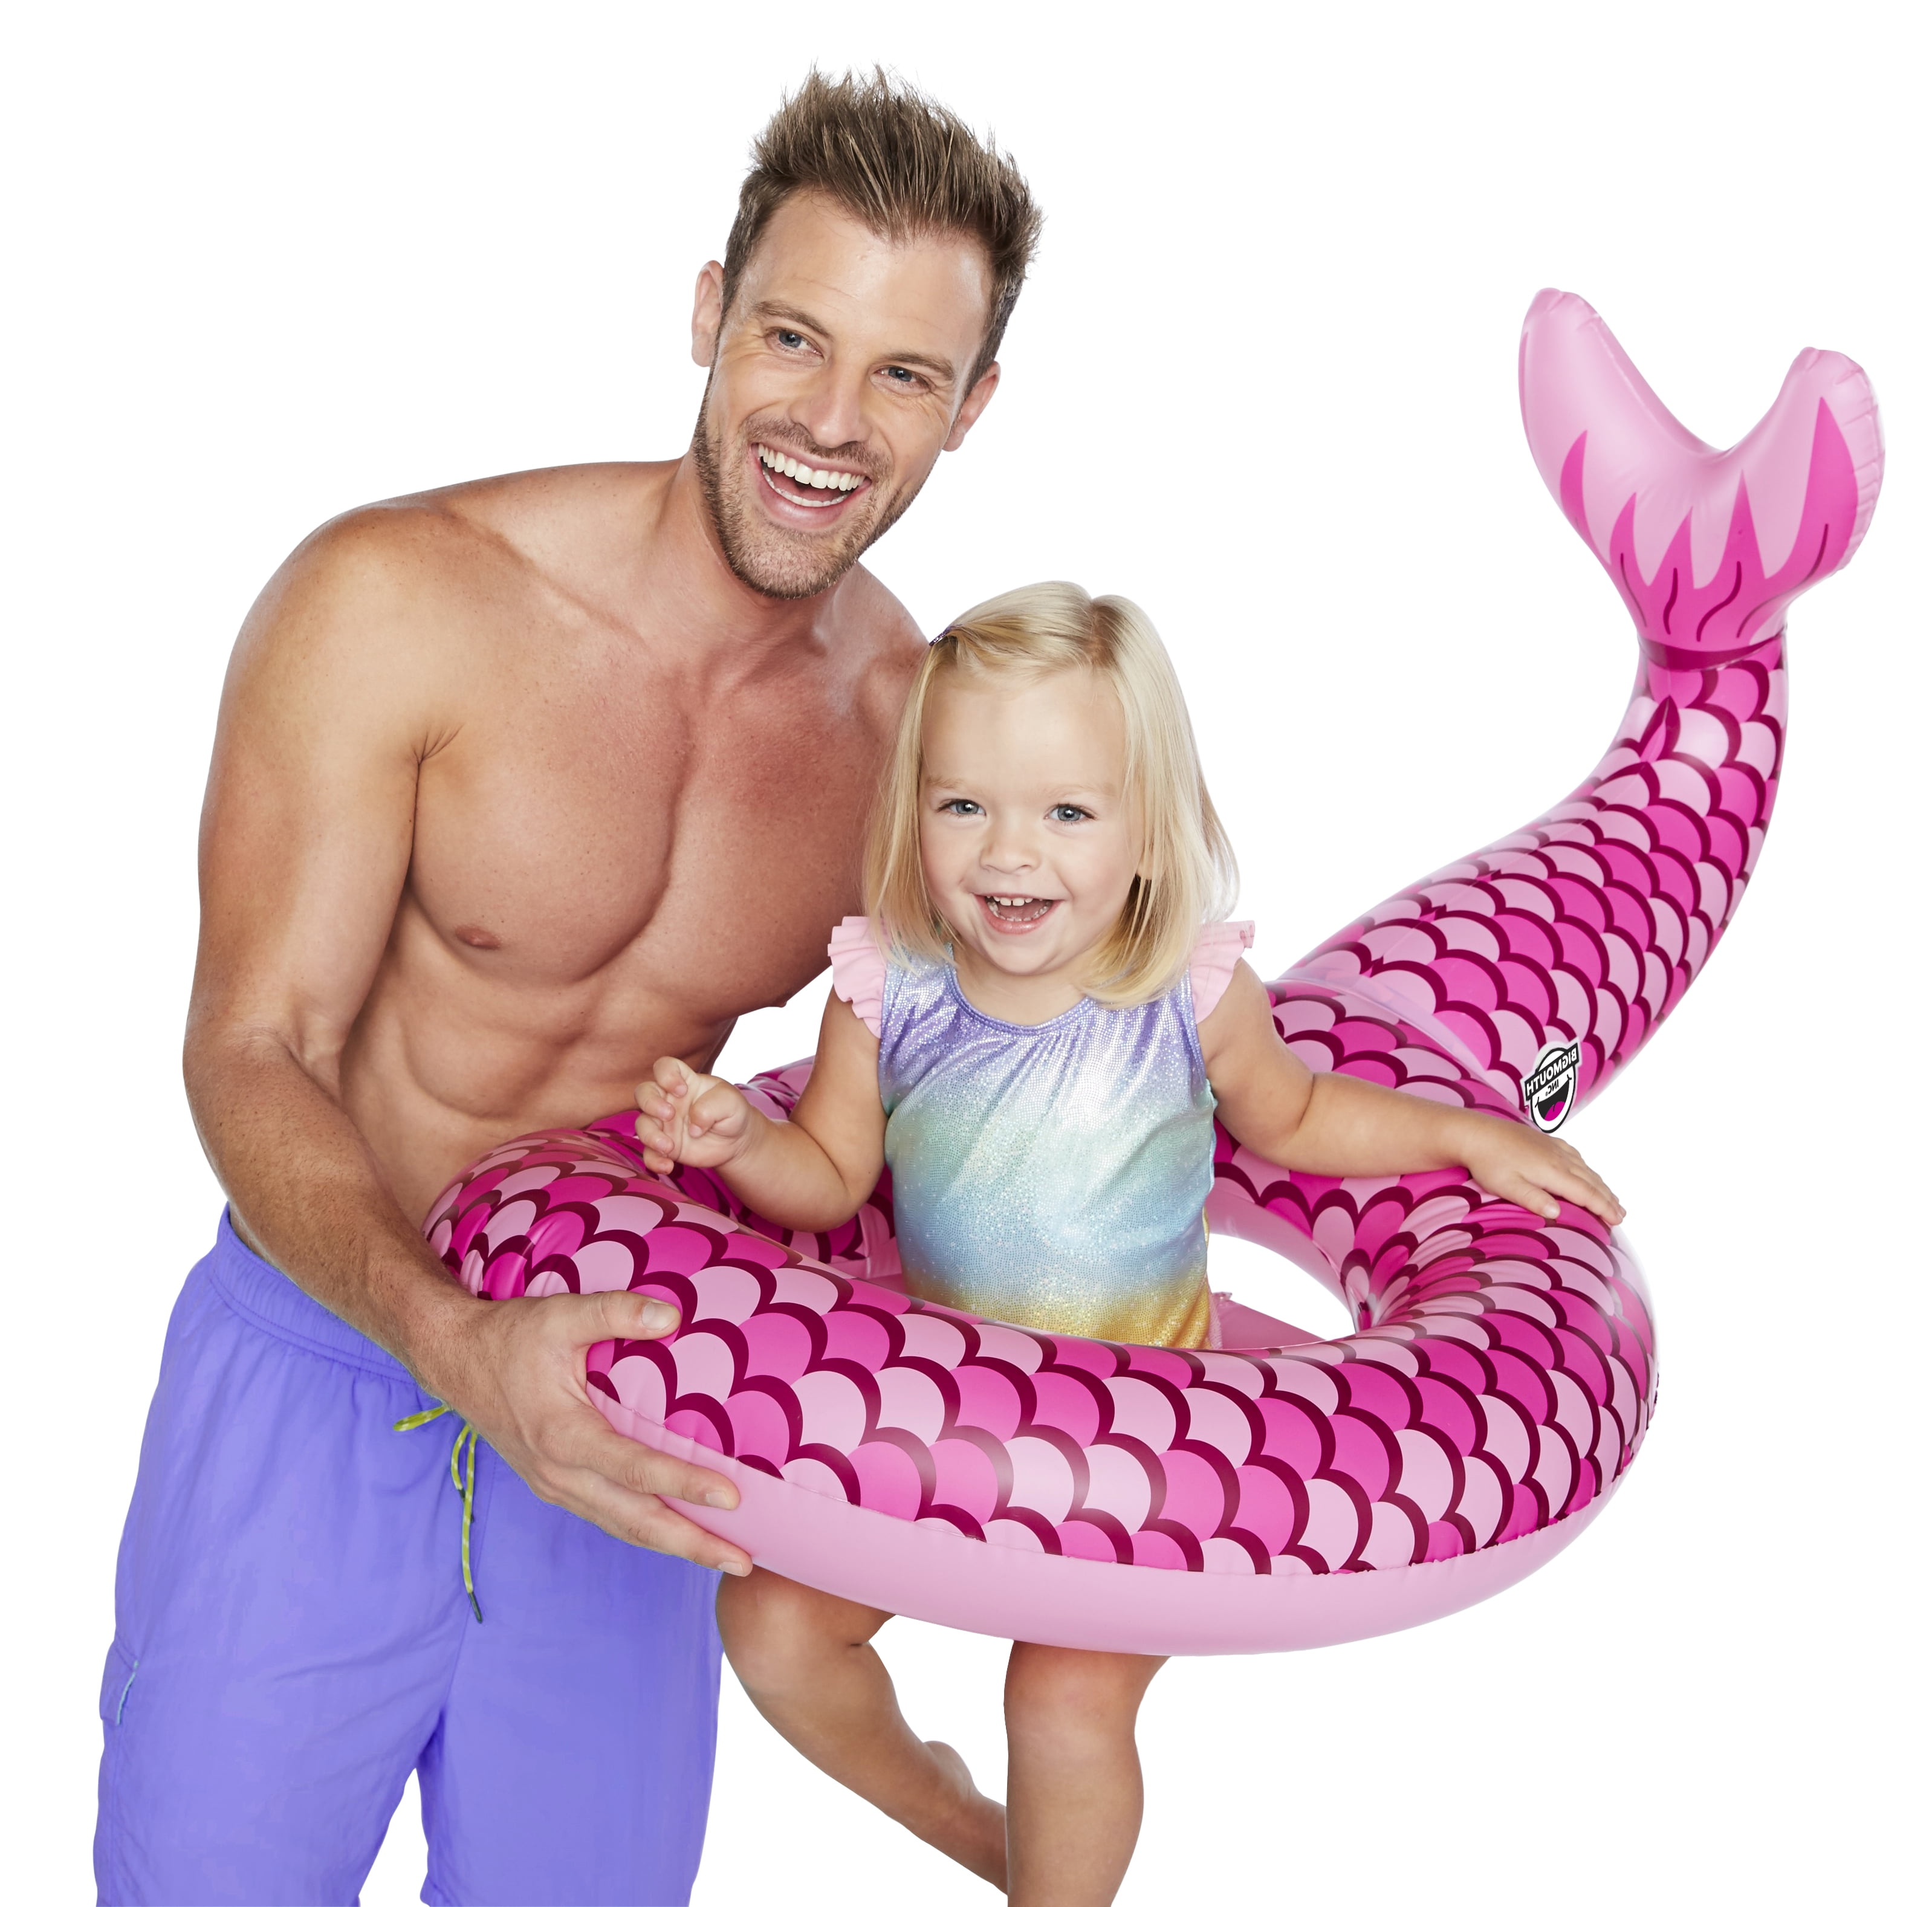 Details about   BigMouth Inc Petite Pineapple Pool Float for Infants/Kids Ages 1-3 NEW 